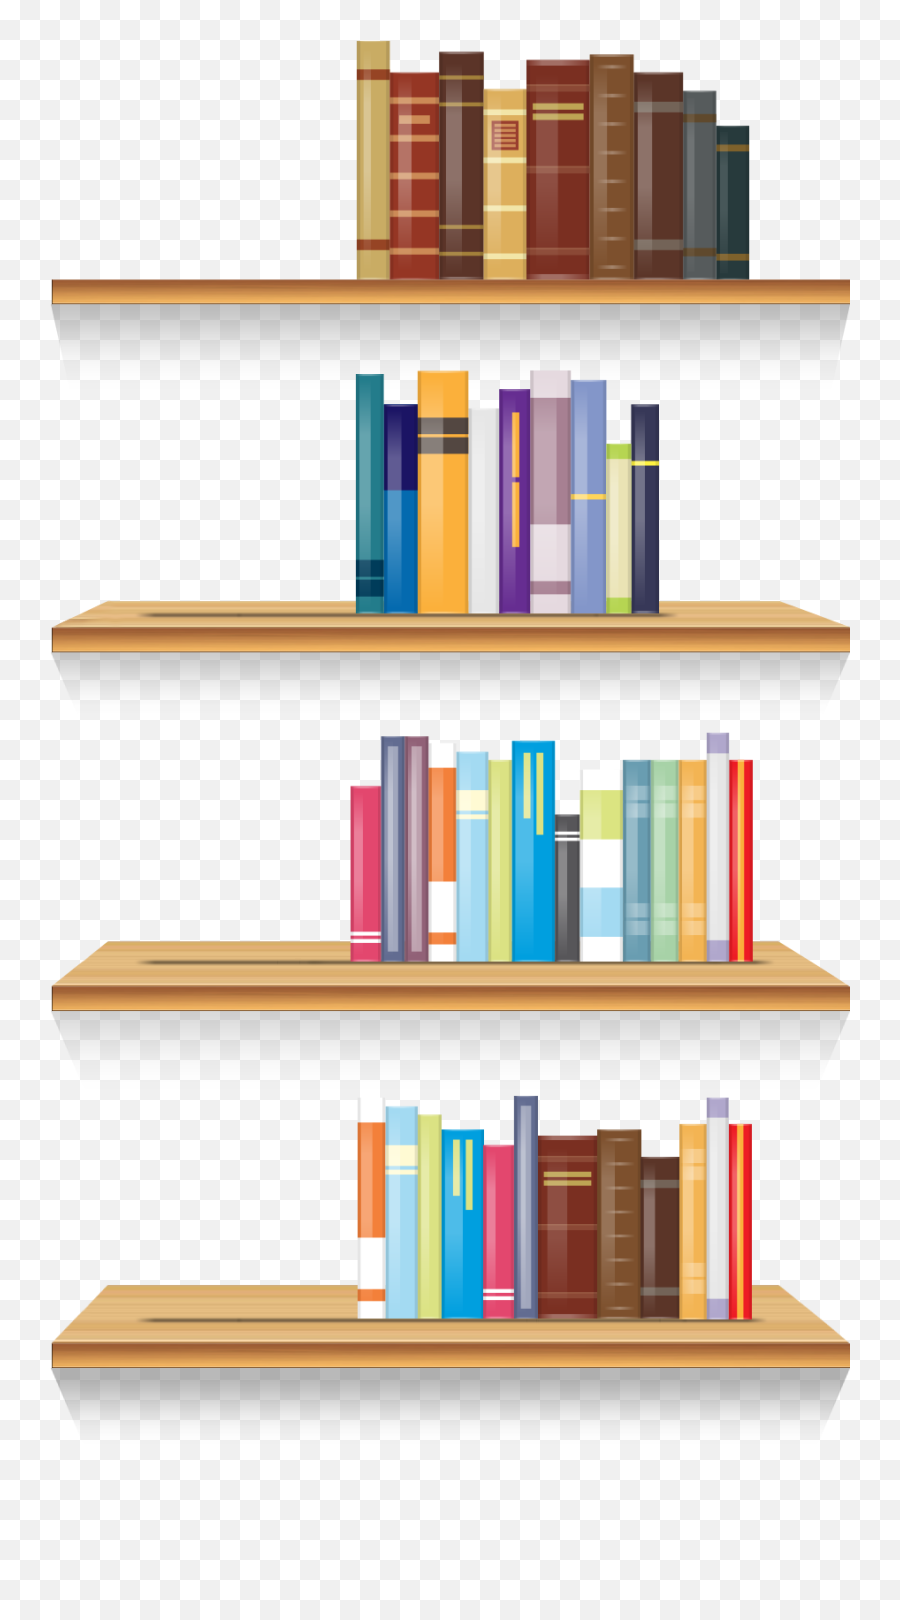 Hong Kong Competition Exchange - Bookcase Emoji,Agreement Bookcase Emotion